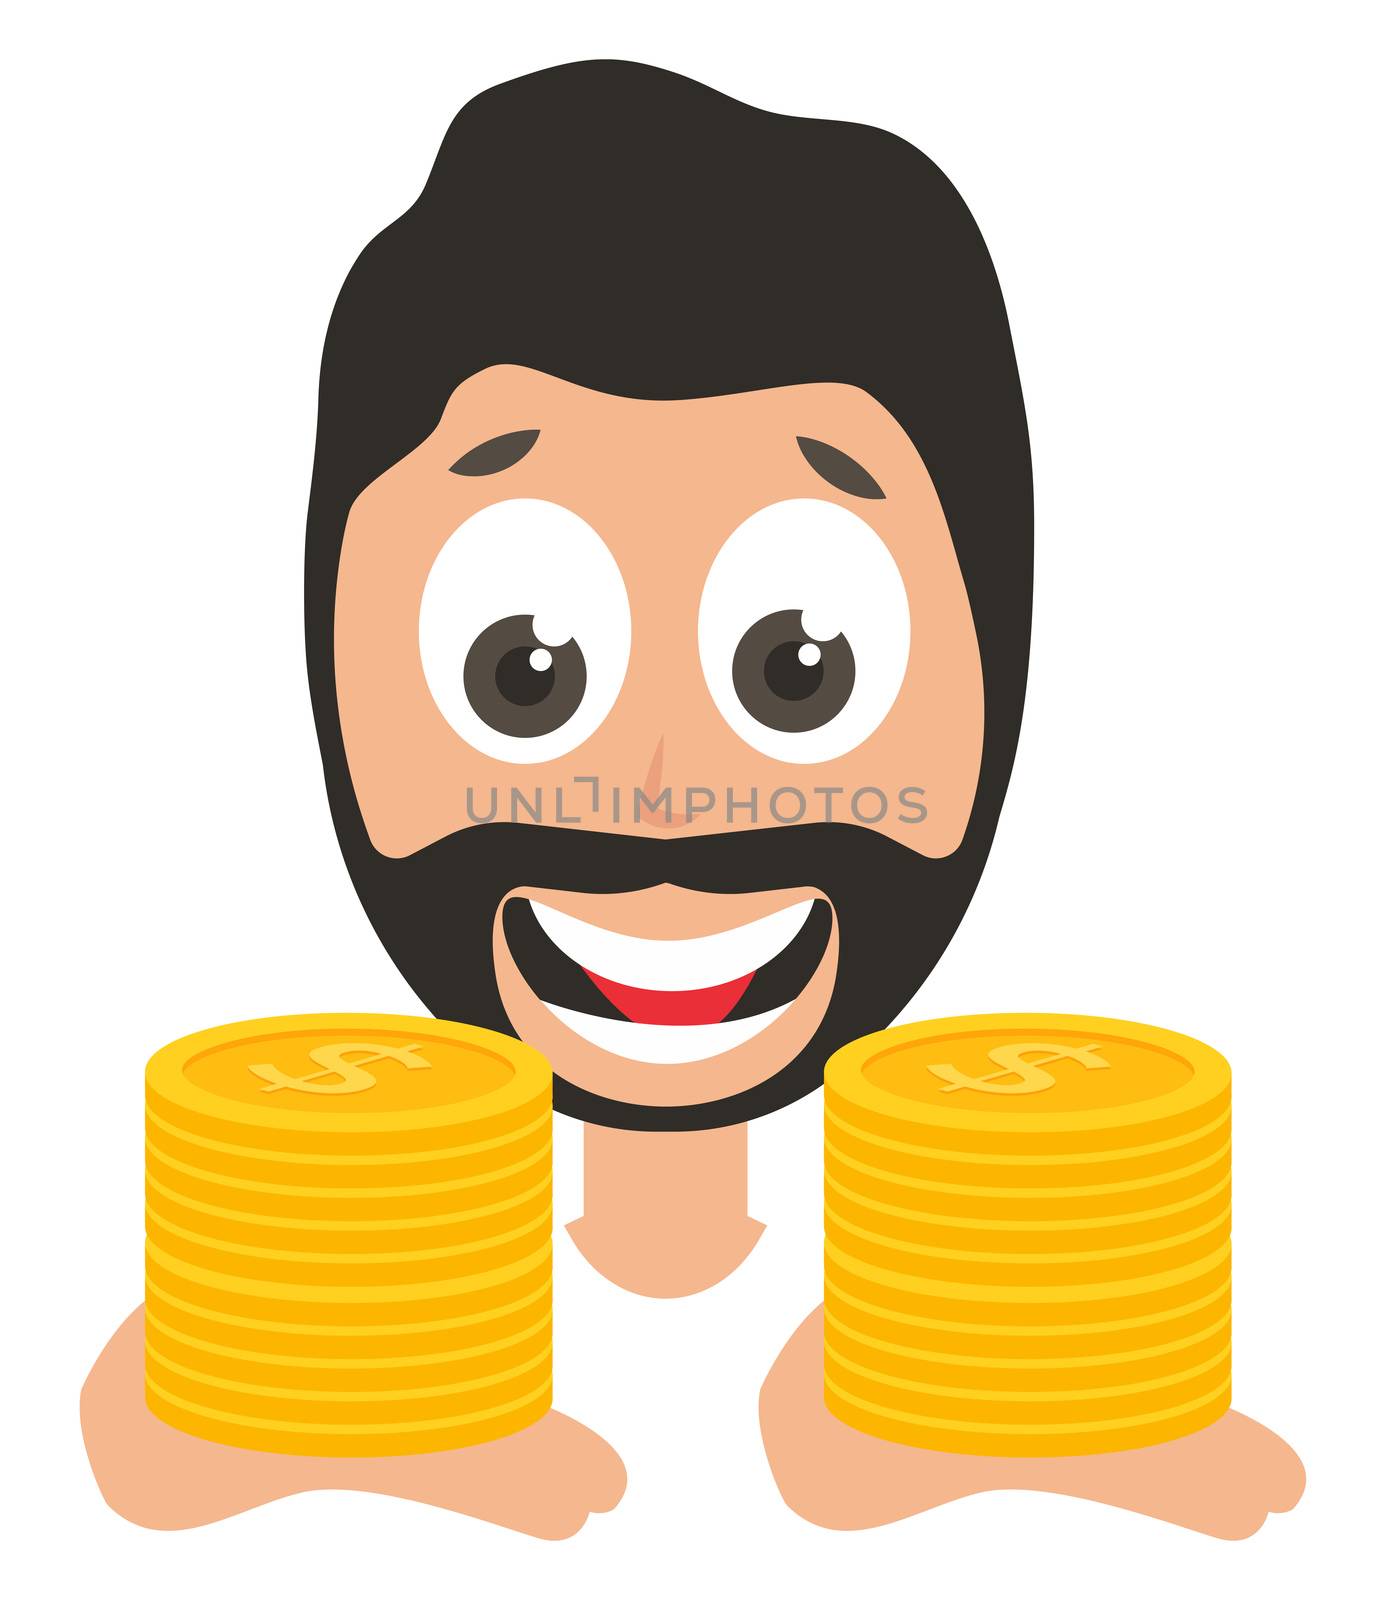 Man holding coins, illustration, vector on white background by Morphart